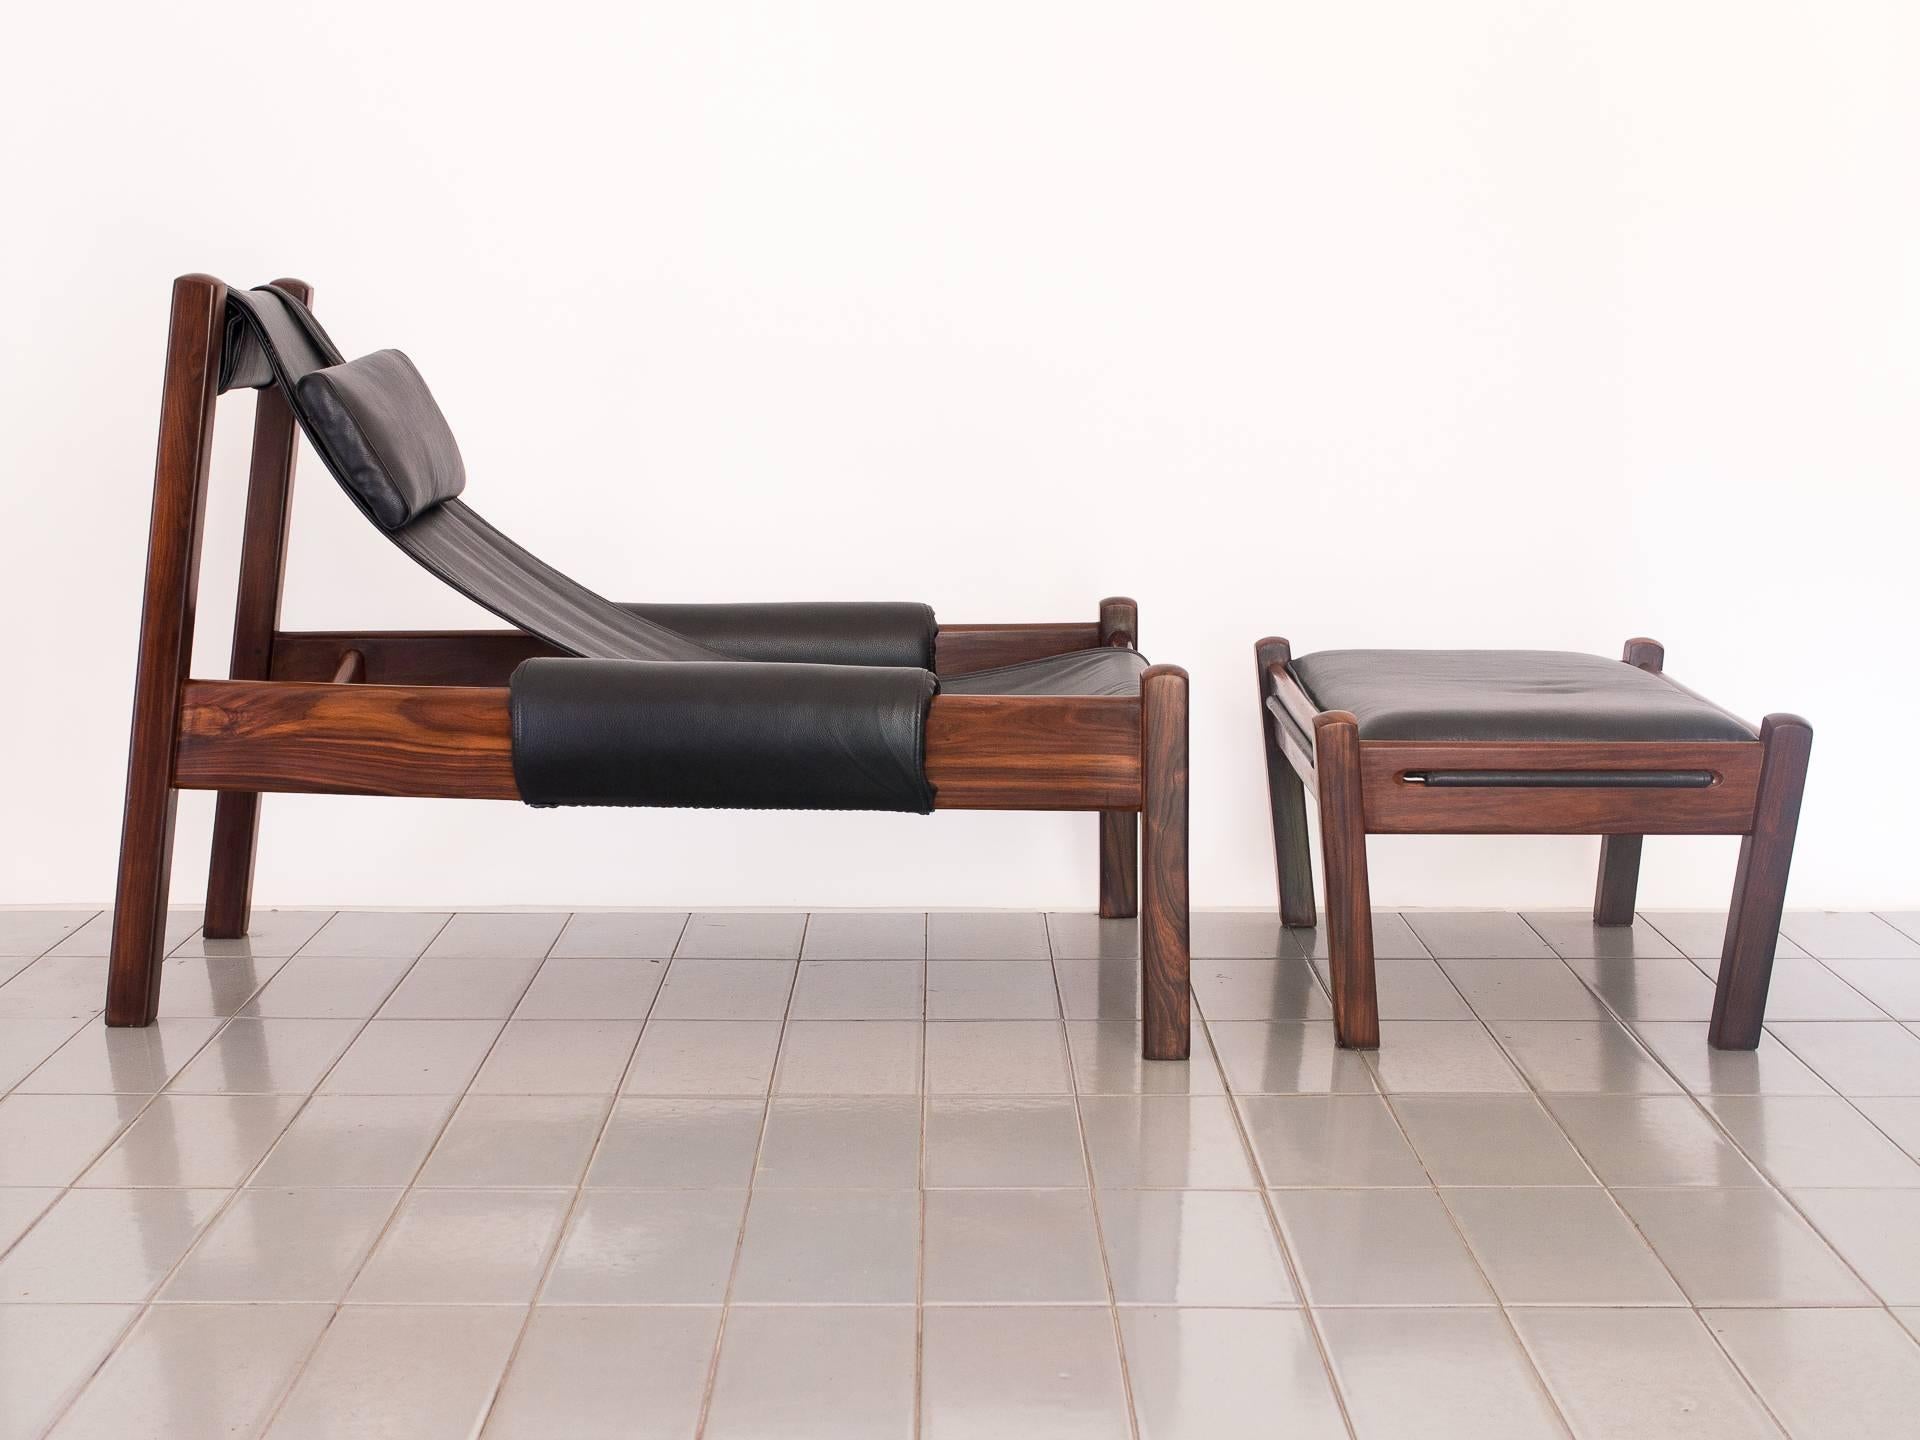 Rosewood and leather lounge chair, with ottoman and headrest. Designed by Hélvio Polito, Roberto de Hollanda, Jerônimo Filho and Carlos Pontual, this chair was acclaimed with the IAB/PE grand jury prize in 1969.

     